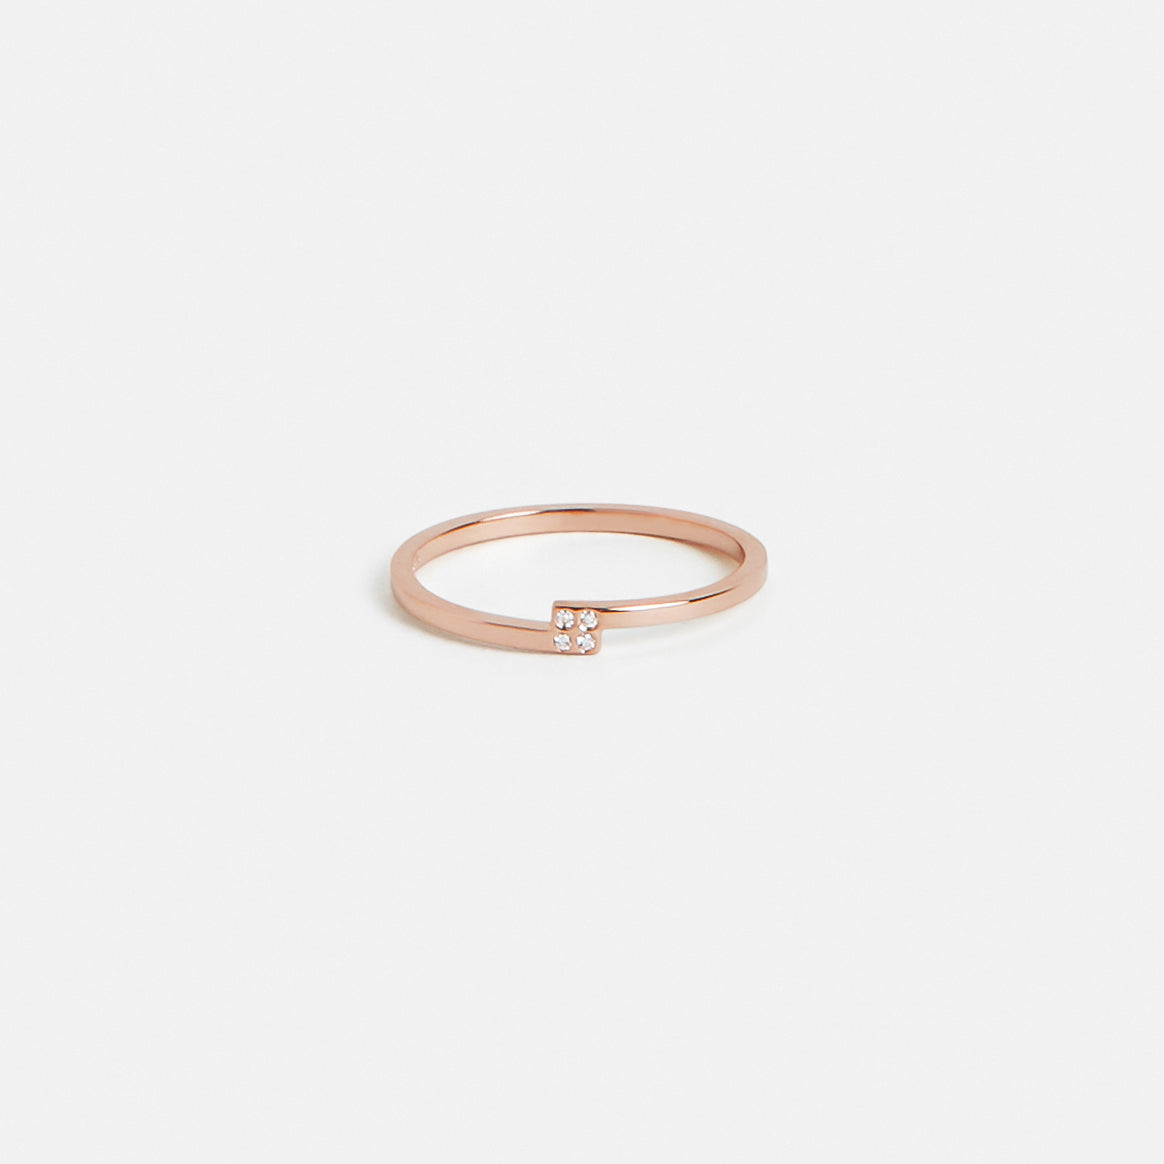 Piva Thin Ring in 14k Gold set with White Diamonds By SHW Fine Jewelry NYC